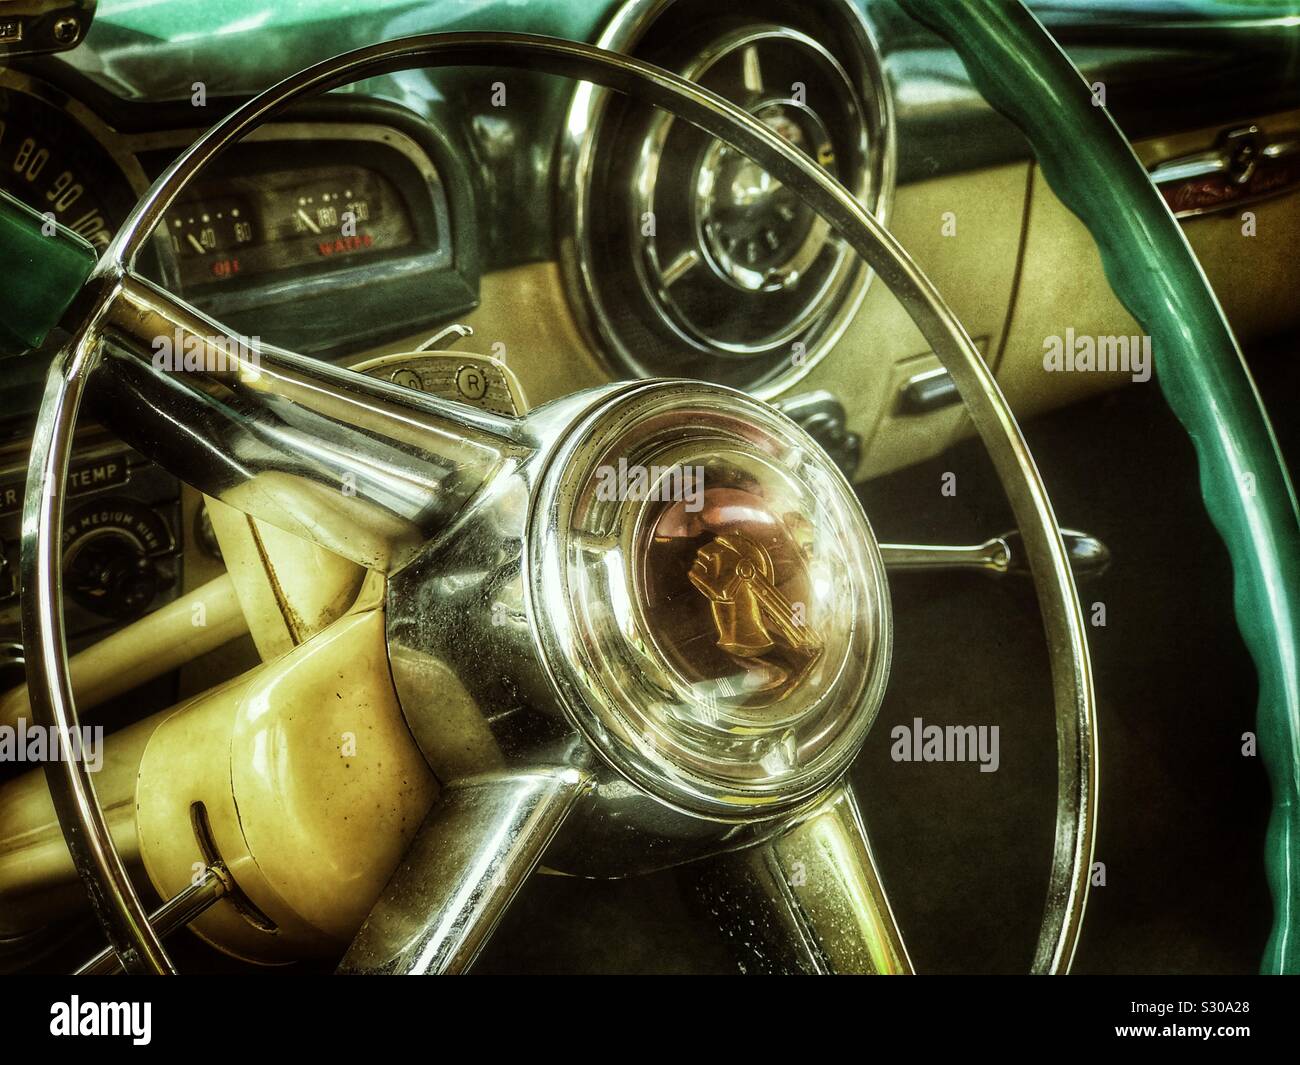 Old Pontiac Chieftain steering wheel and dashboard Stock Photo